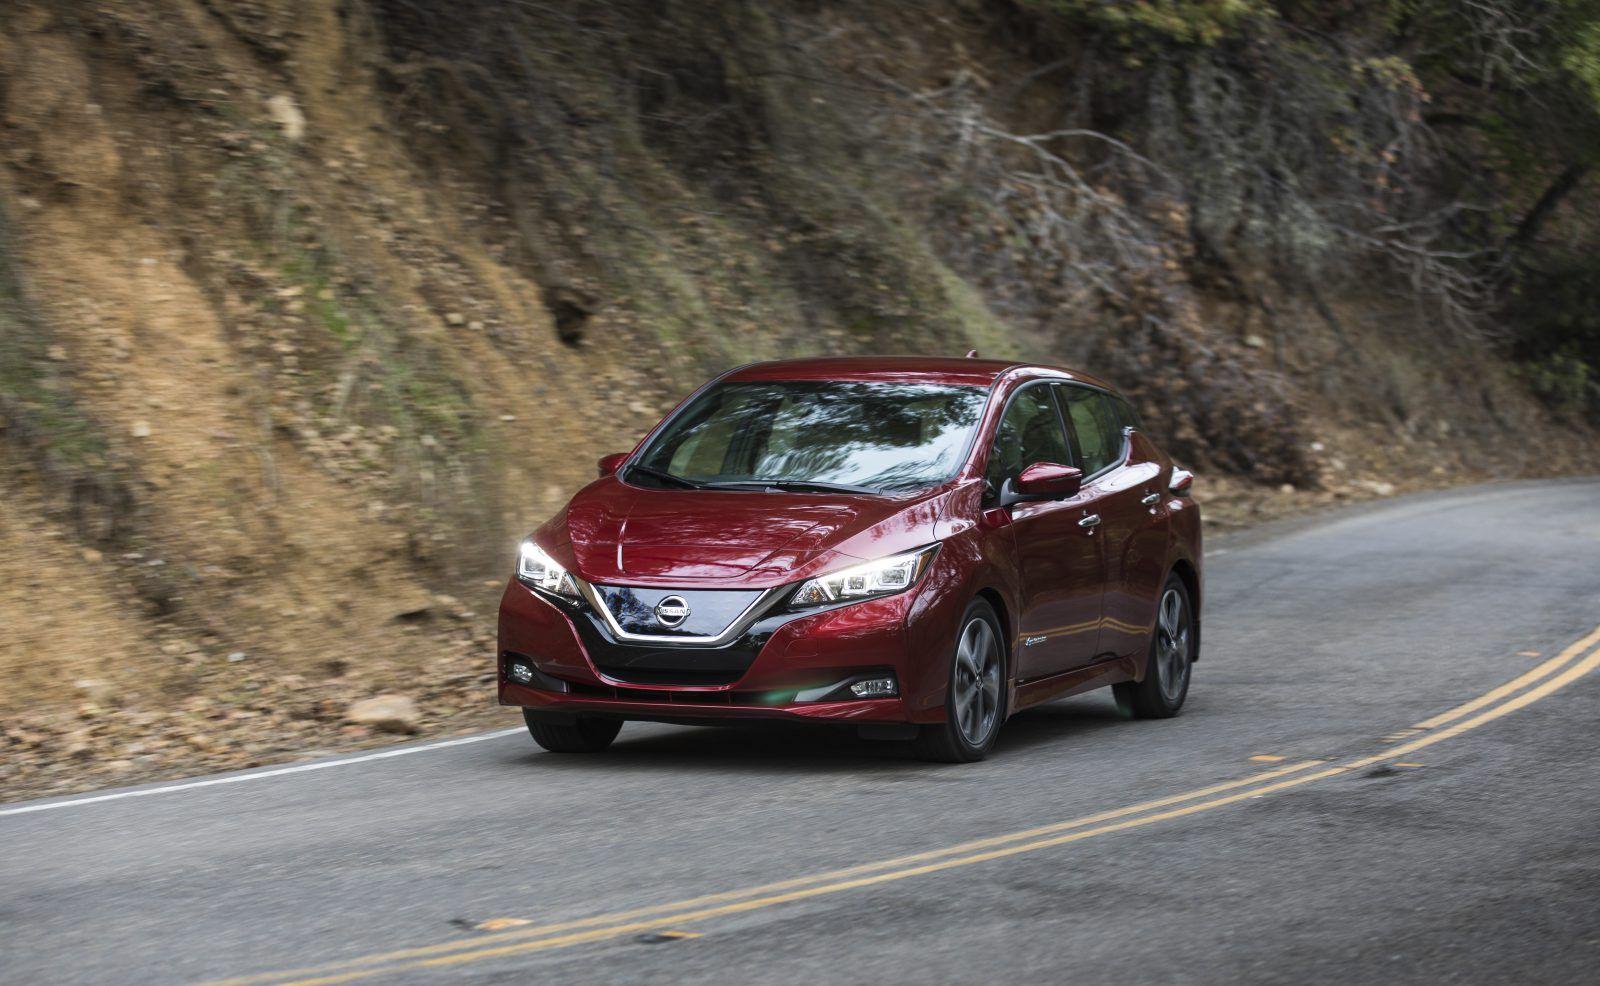 Nissan says the new Leaf is 'the fastest selling electric vehicle